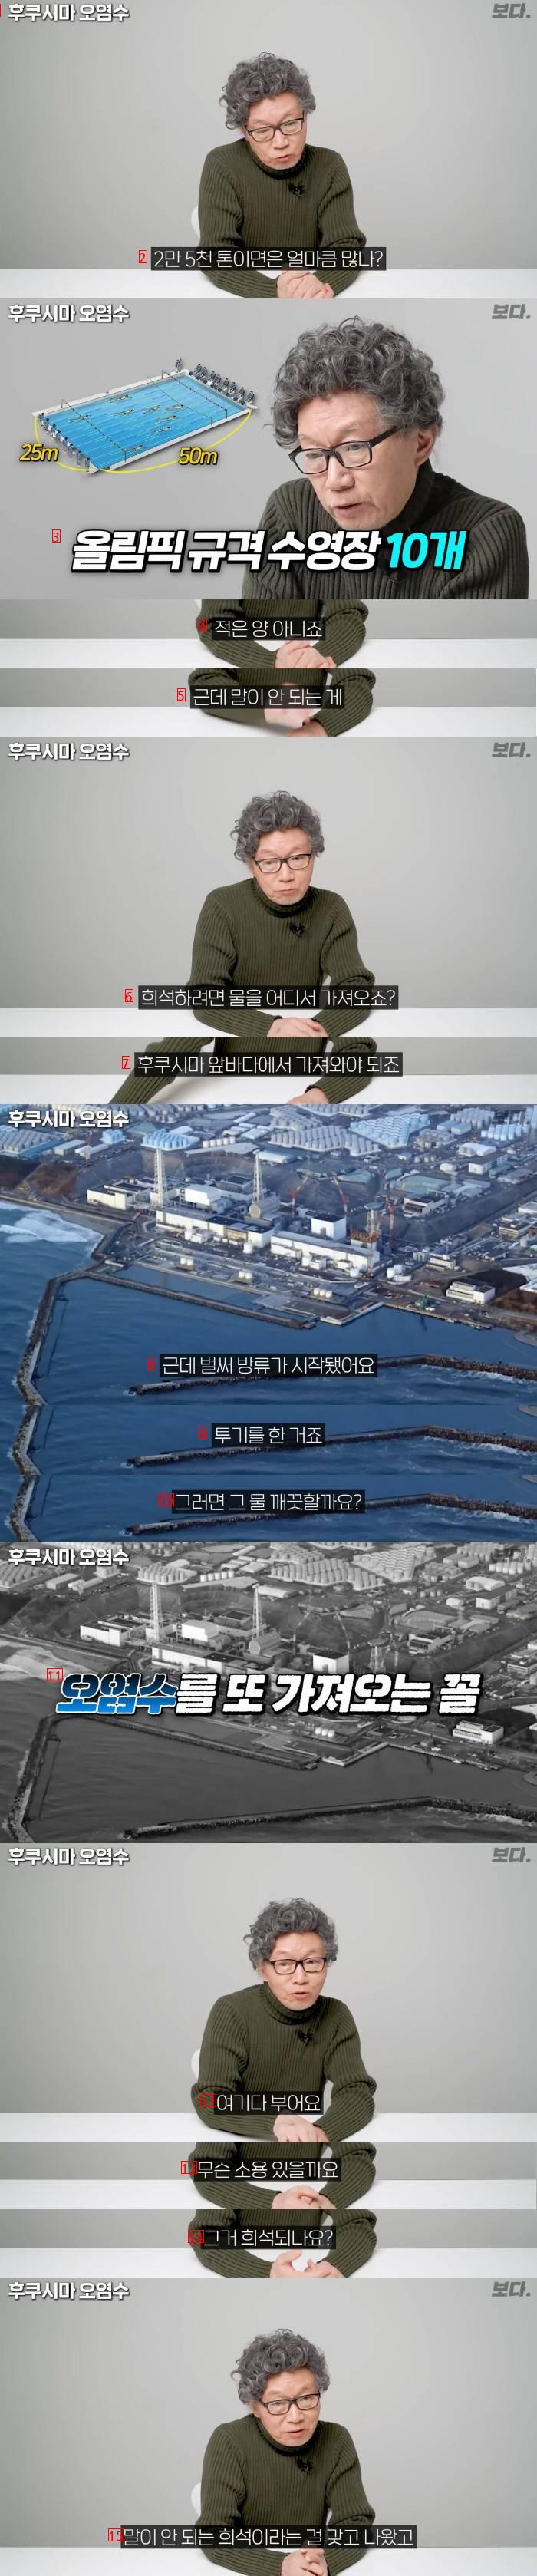 Fukushima contaminated water, a nuclear professor at Seoul National University, will arrive in Korea in a week